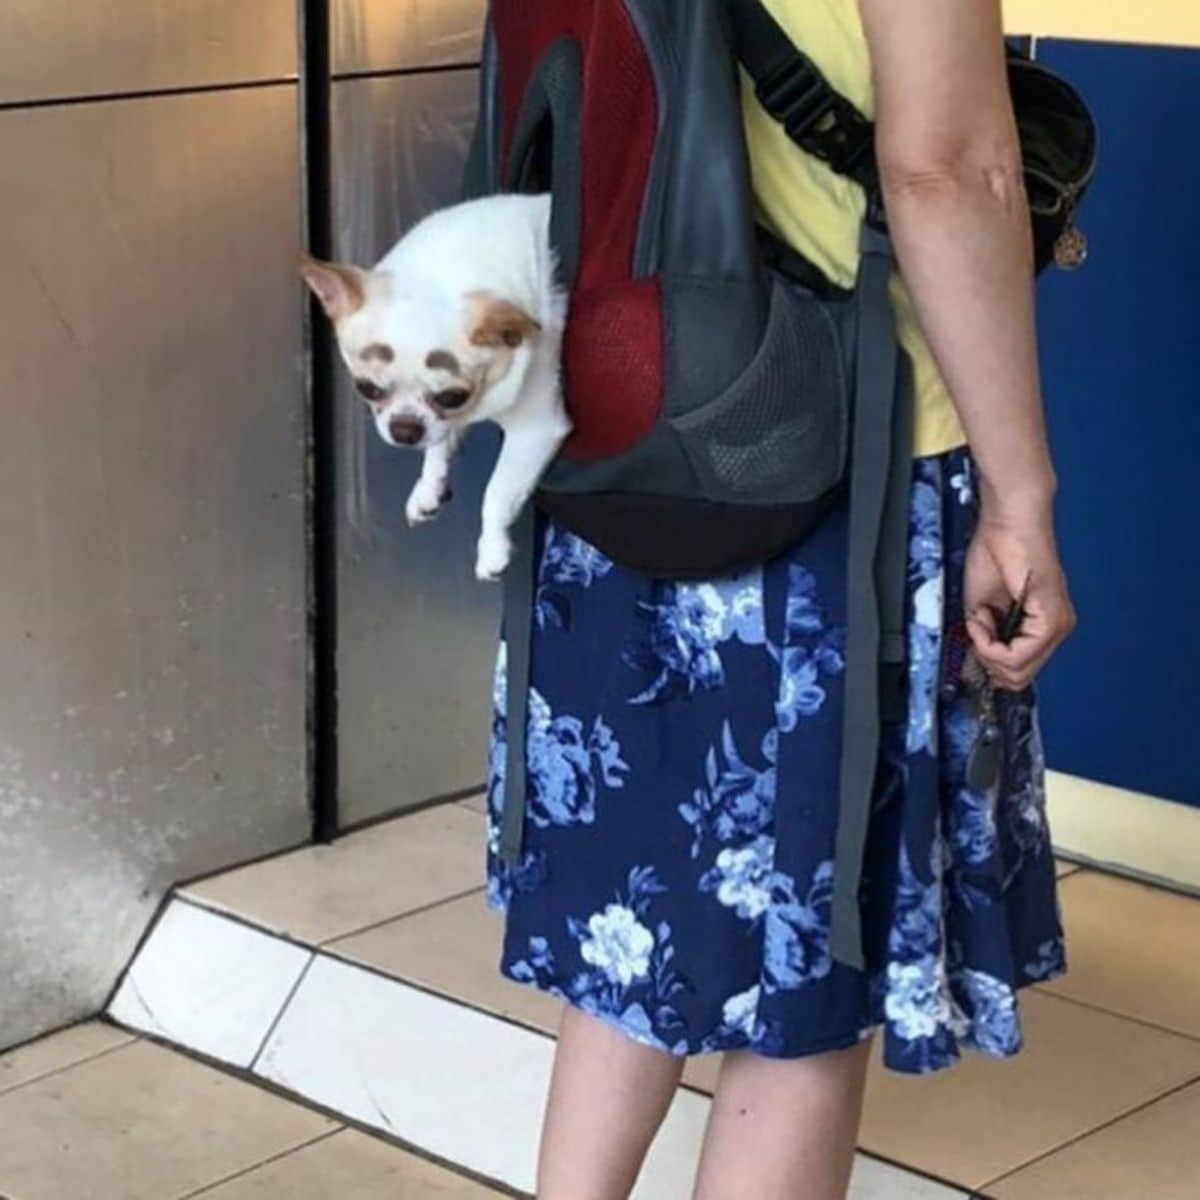 white dog sticking halfway out of a grey and red backpack being worn by someone